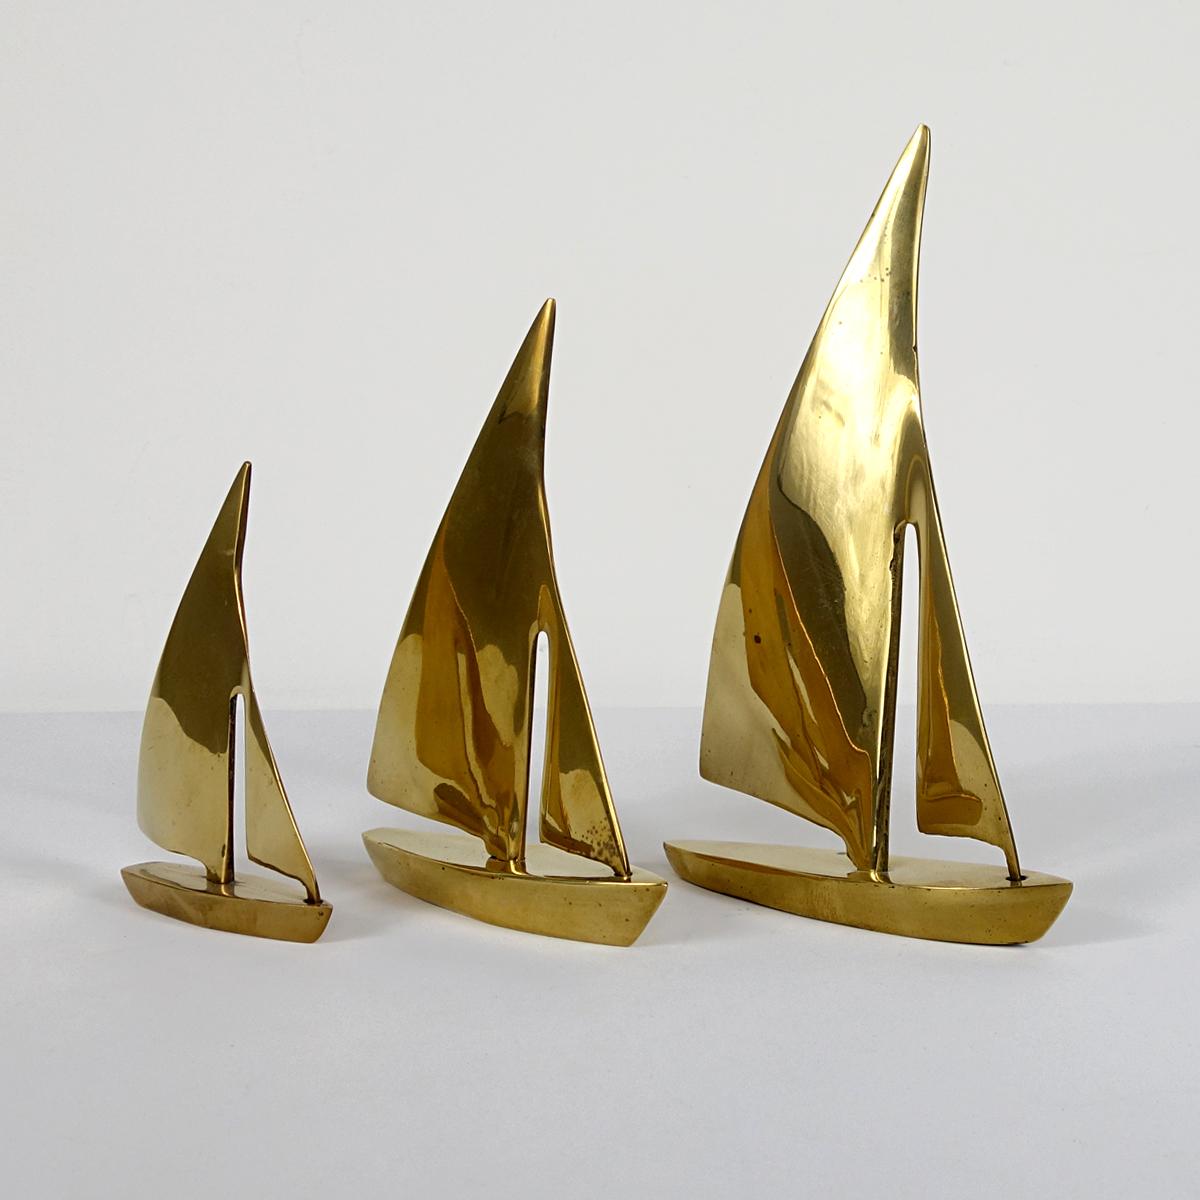 The ocean race in full swing!
The enticing and legendary ocean race is depicted in this set in solid brass attributed to Curtis Jeré. A wonderful sporty and decorative trio to sit on your desk, credenza or bookcase.
The set of three heavy brass